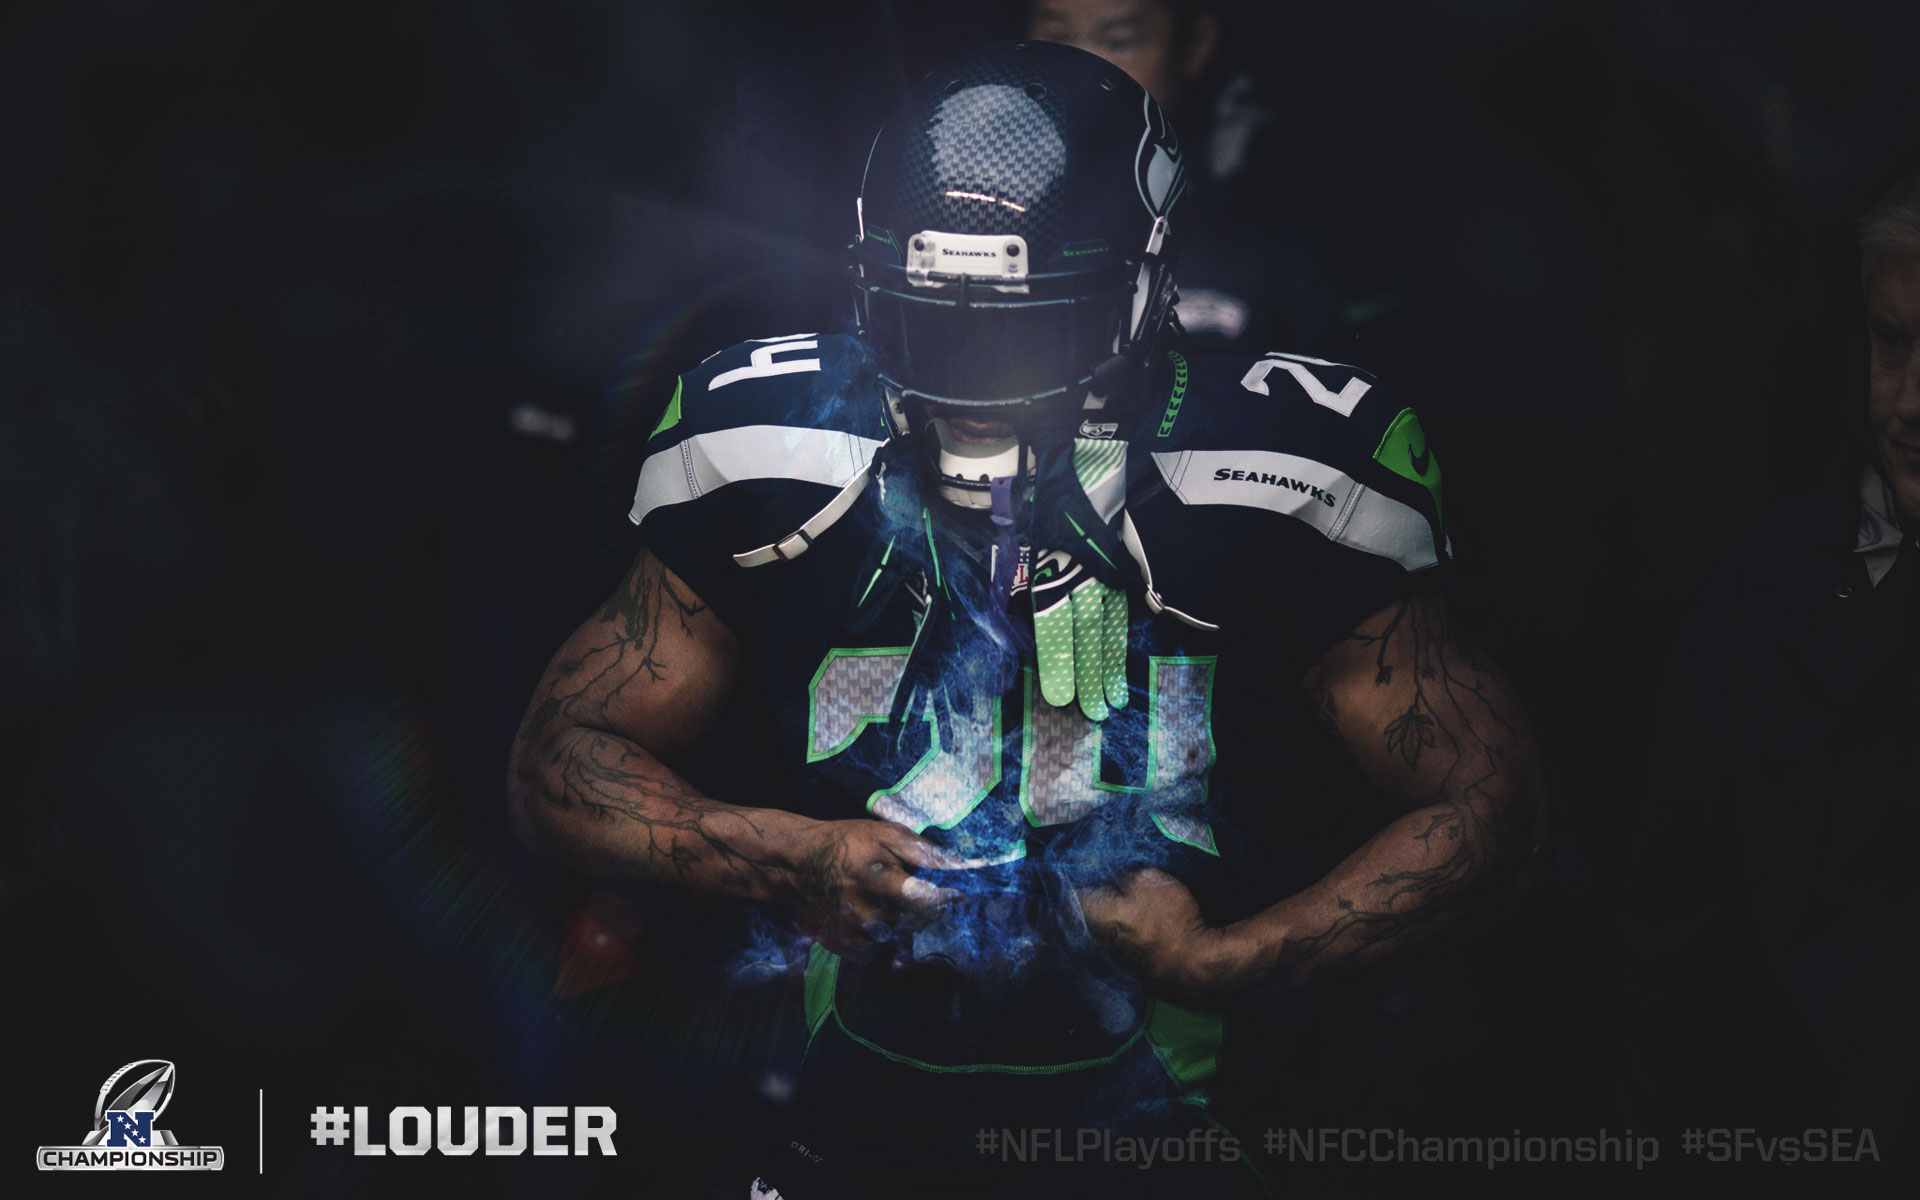 Seattle Seahawks IPhone Android Free Wallpaper Wallpaper Sport 94828